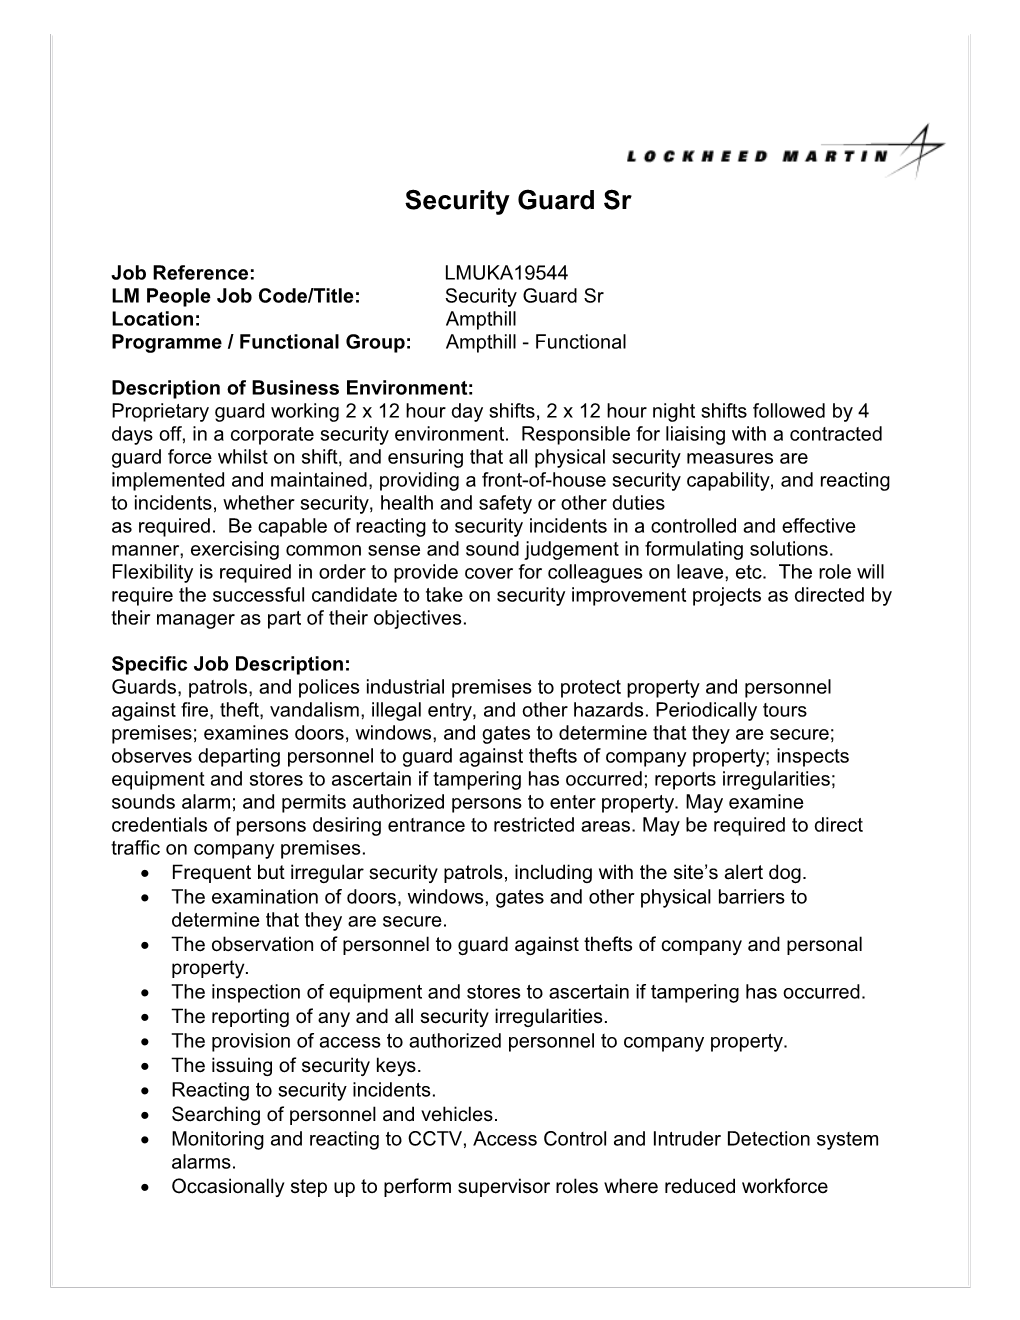 LM People Job Code/Title: Security Guard Sr